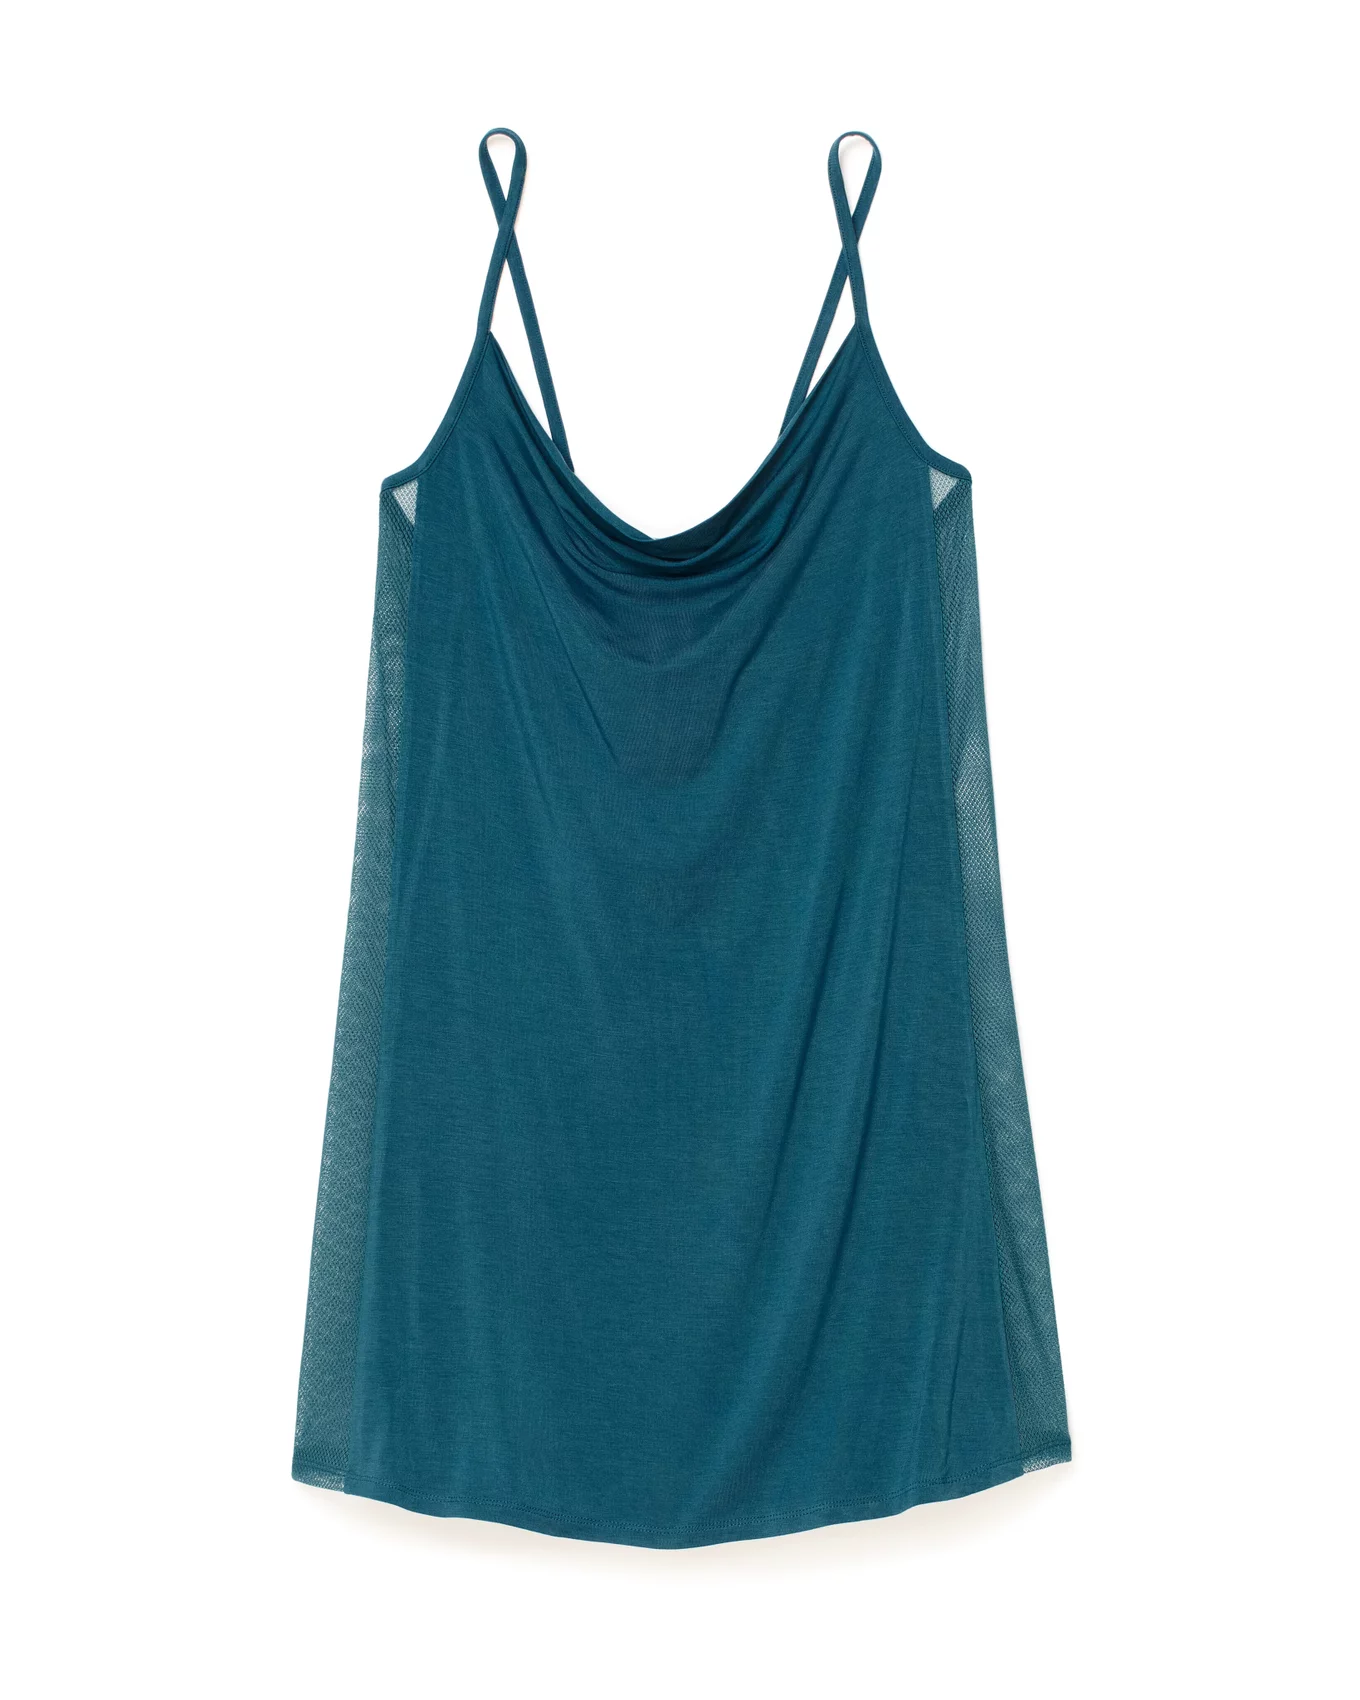 4 Pack: Active Basic Cami Tanks in Many Colors -Small -3XL (XXX-Large,  White/Black/Charcoal/Navy)